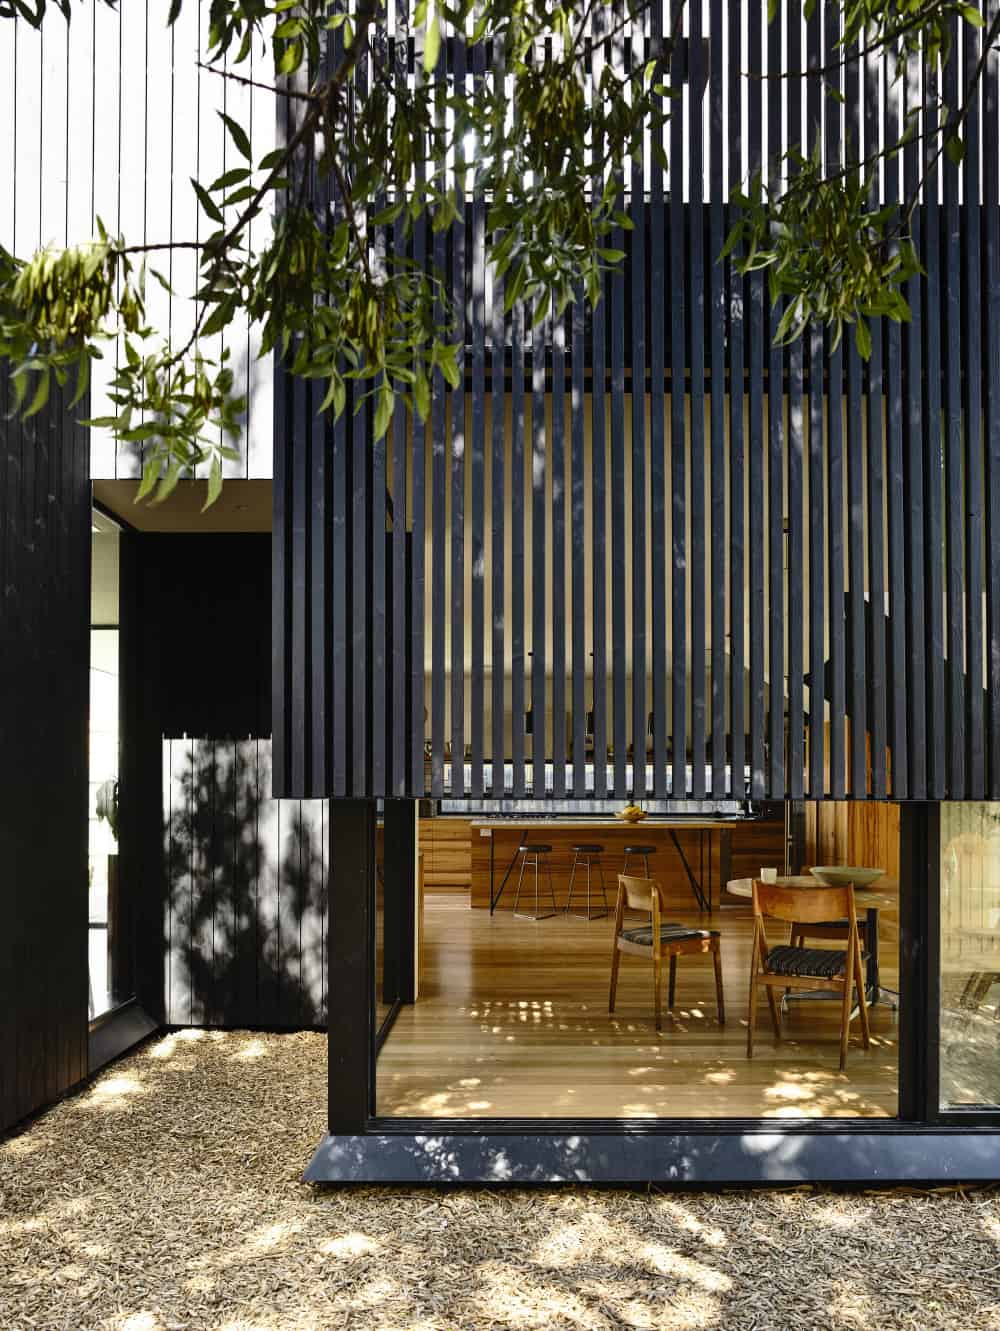 House's glass features get light and privacy from wooden screen layer